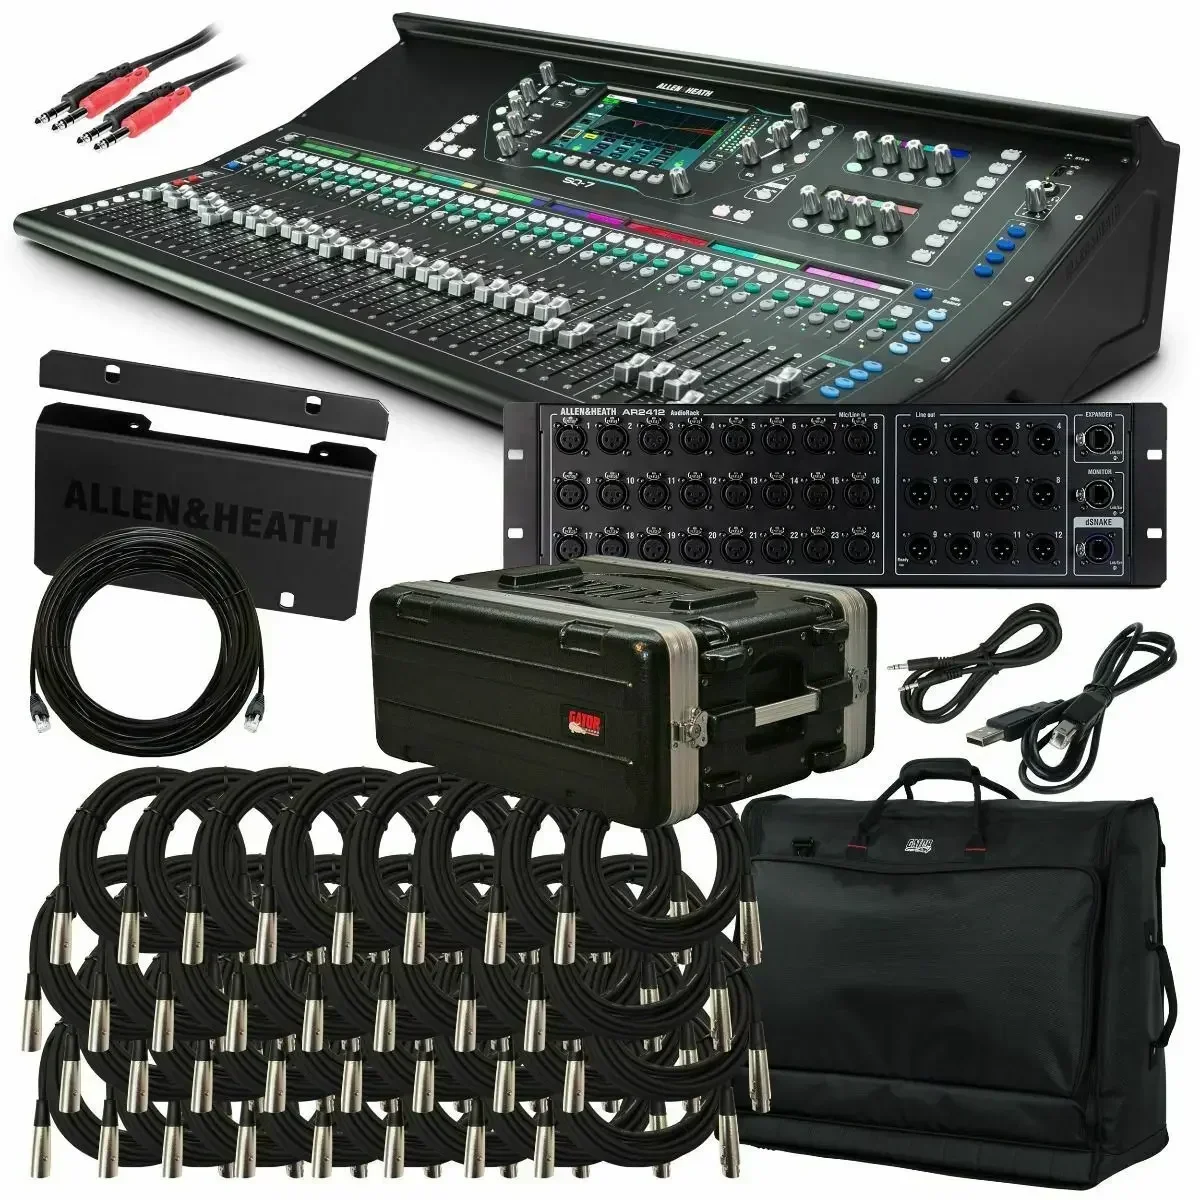 

SUMMER SALES DISCOUNT ON Discount Sales Allen & Heath SQ-7 48-Channel 36-Bus Digital Mixer with 32+1 Motorized Faders